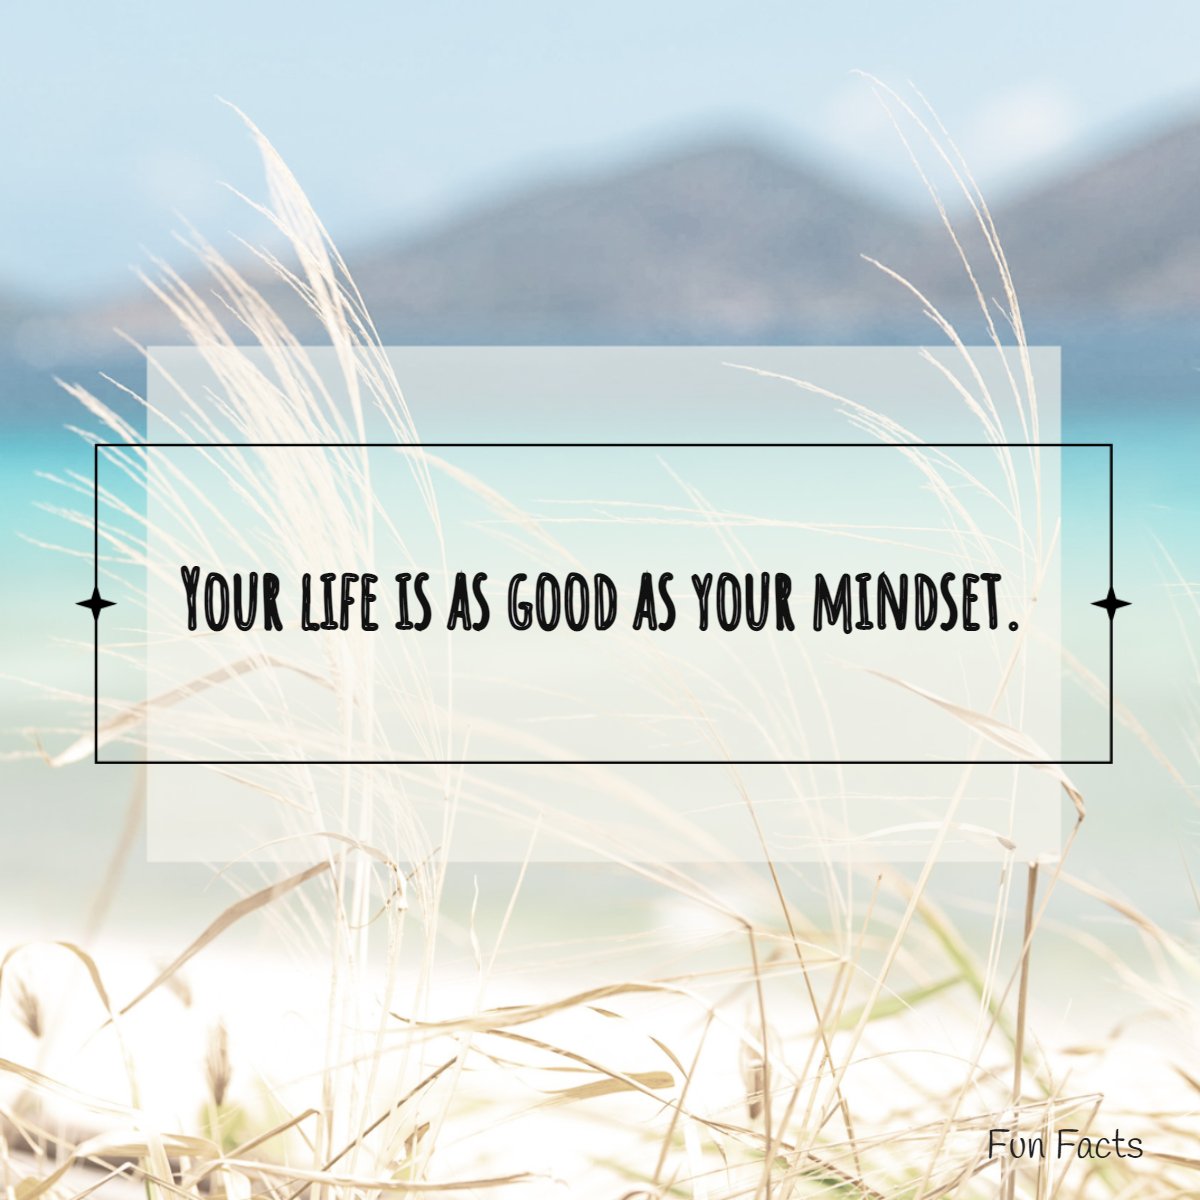 Your life is as good as your mindset.

 #inspiring #sucess #quote

 #AskDomailleRealEstate #LoveWhereYouLive #RochesterMNRealEstate #ByronMNRealEstate #ByronMNRealtor #RochesterMNRealtor